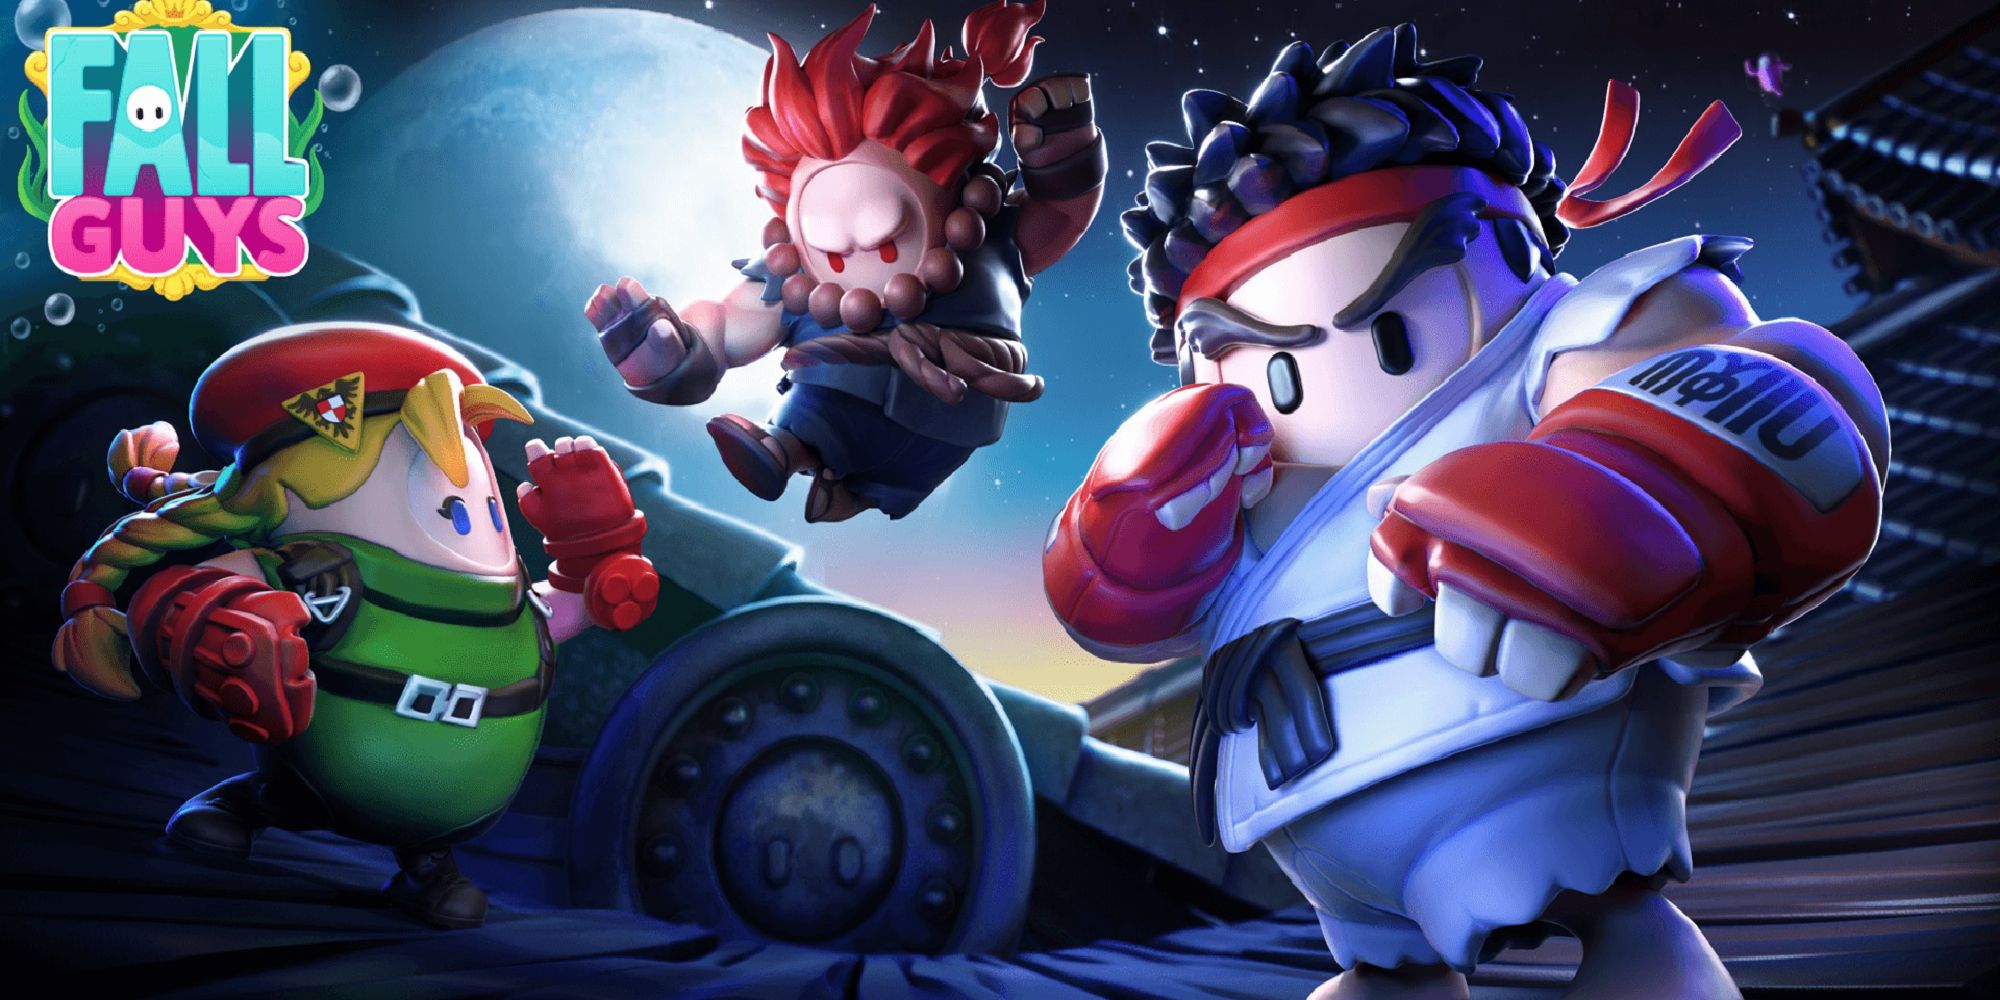 Promotional artwork showing all 3 Street Fighter skins for Fall Guys